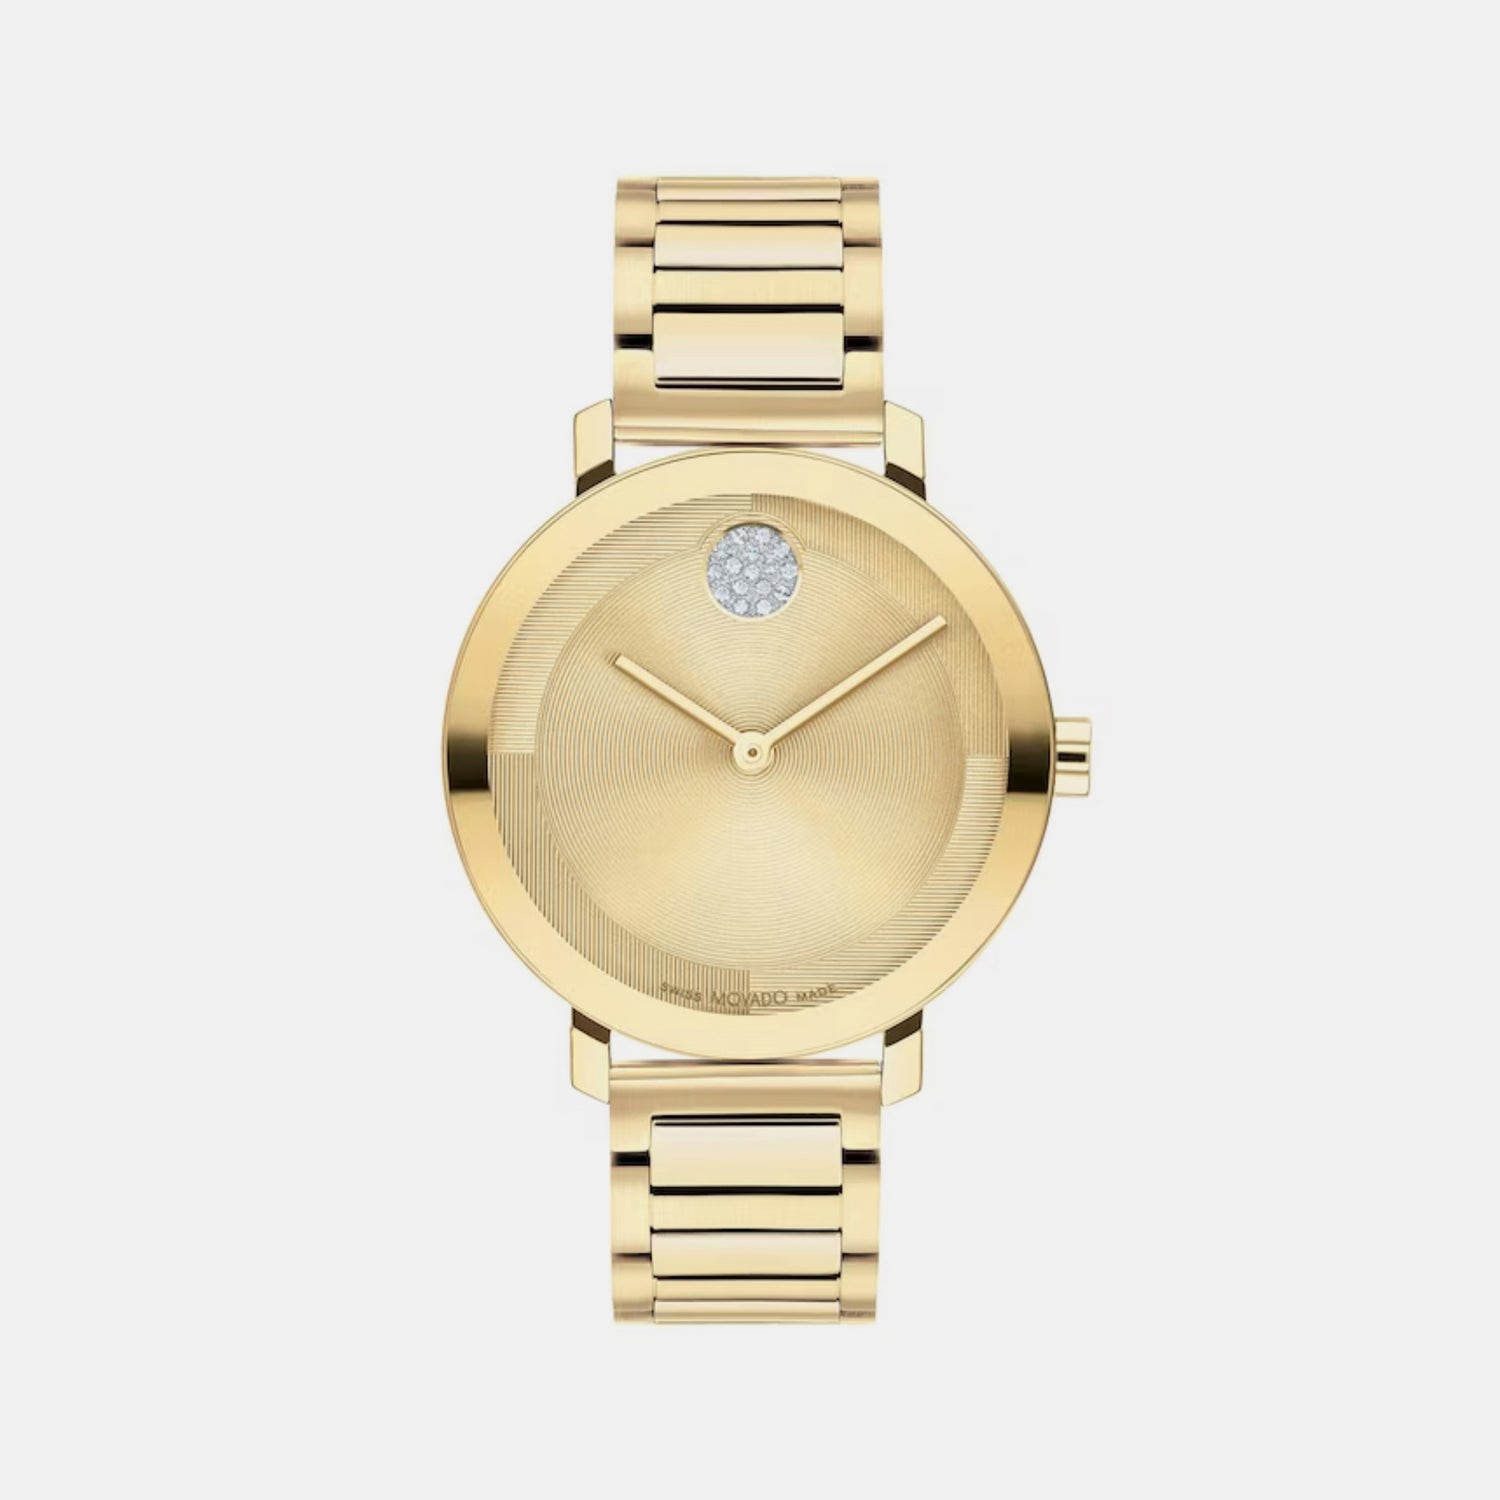 Bold Female Gold Analog Stainless Steel Watch 3601106